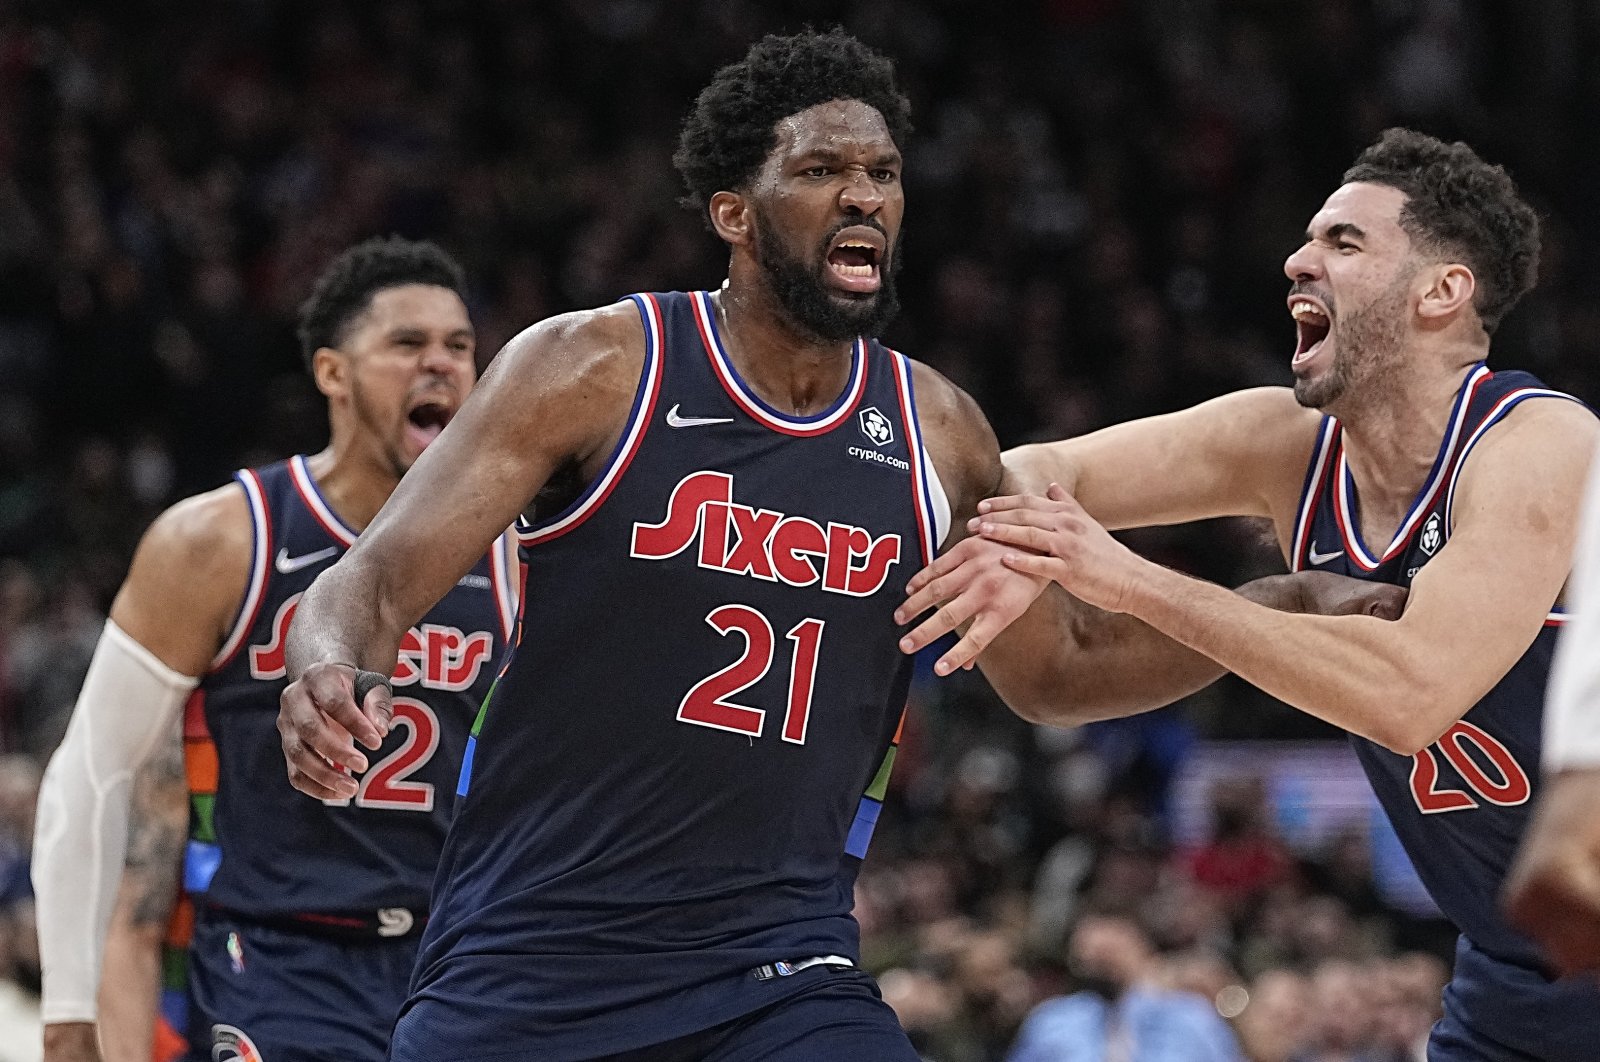 Sixers Georges Niang (R) congratulates teammate Joel Embiid (C) on his game-winning basket against the Raptors in an NBA playoffs game, Toronto, Ontario, Canada, April 20, 2022.